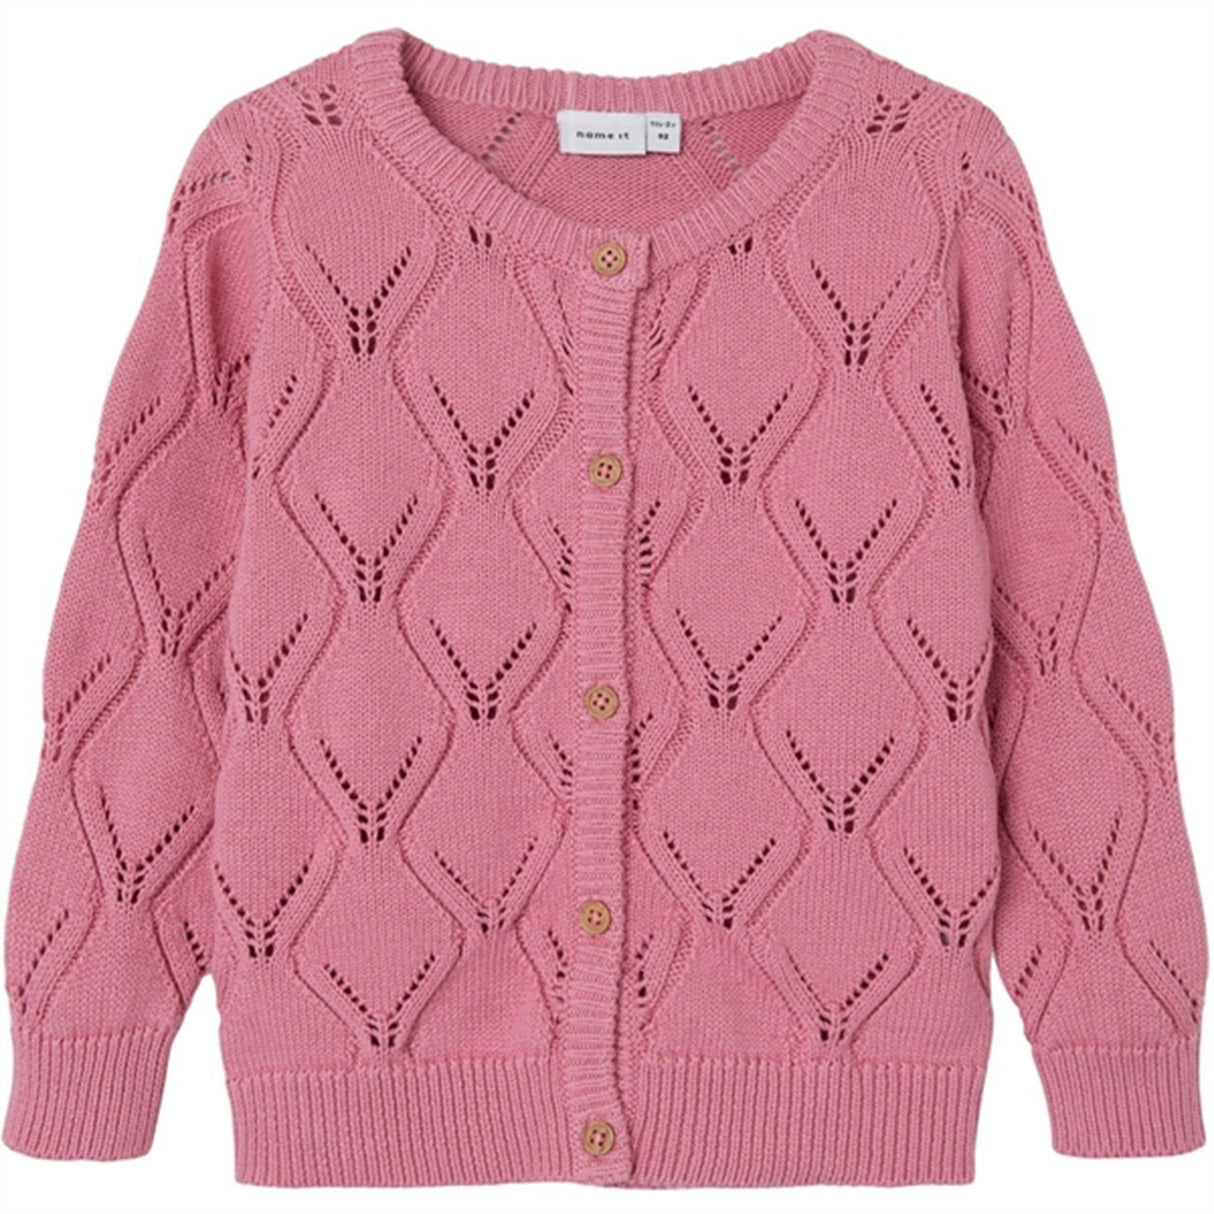 Name it Cashmere Rose Fopolly Stickat Cardigan